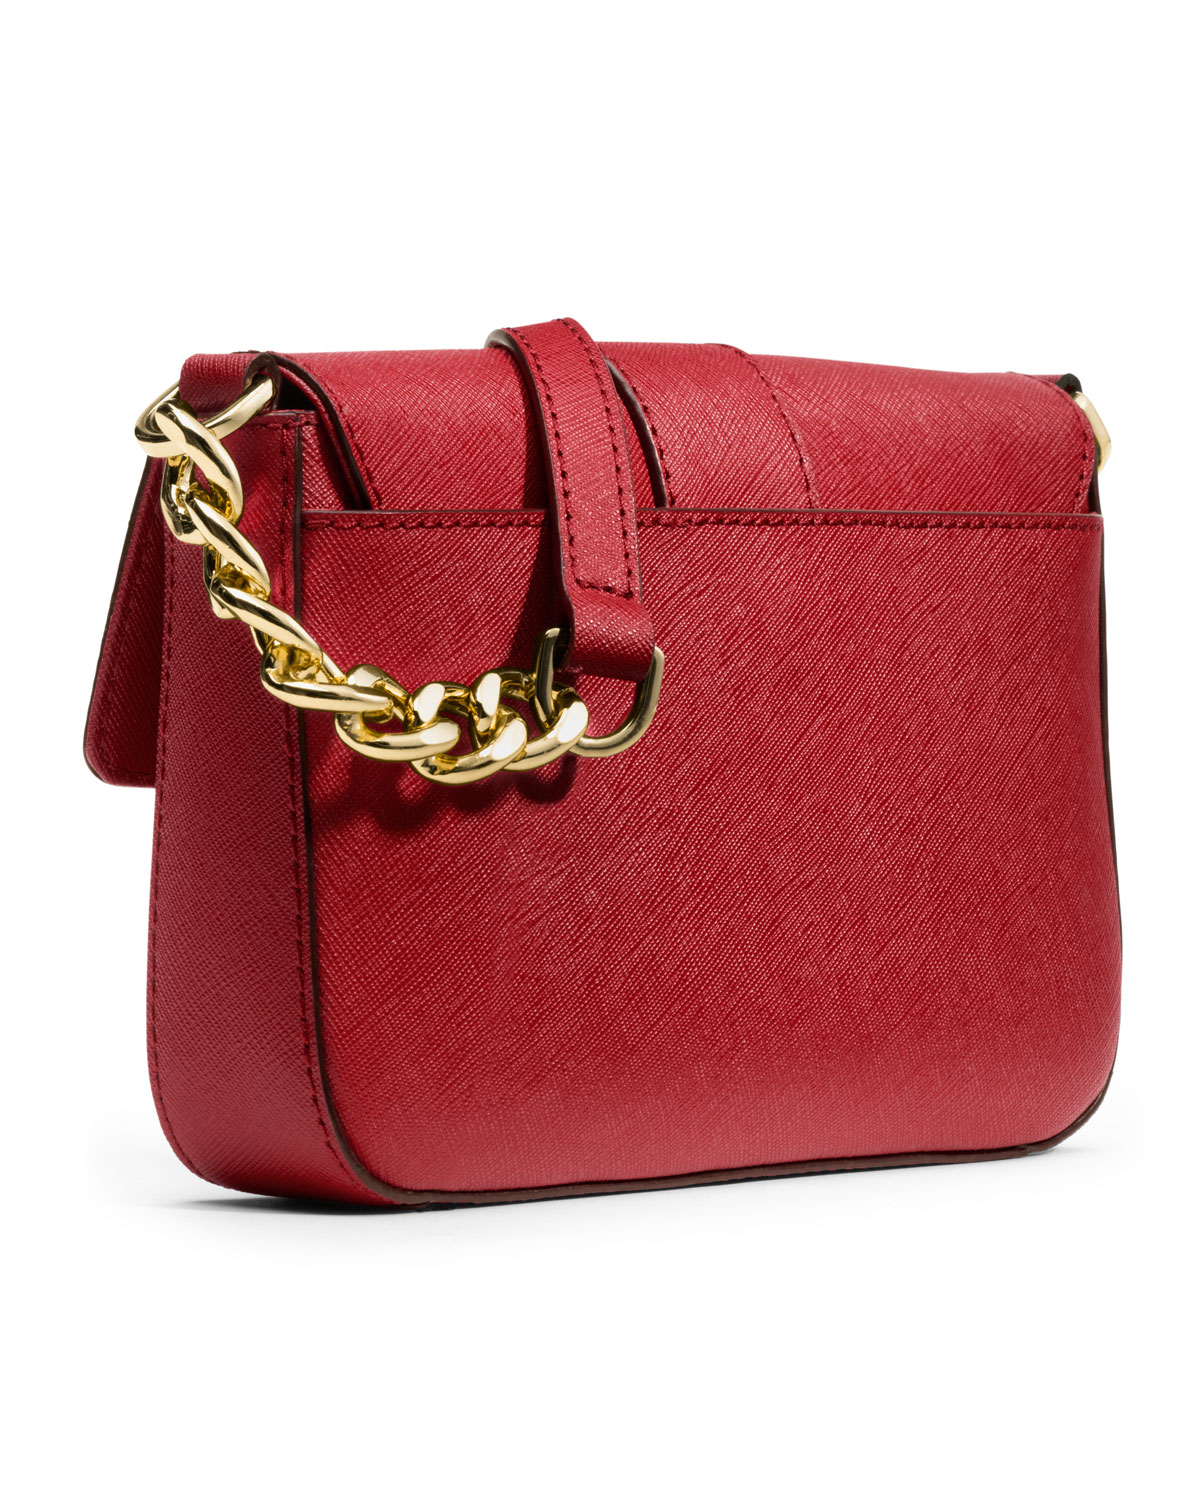 Lyst - Michael Kors Michael Small Fulton Saffiano Messenger in Red